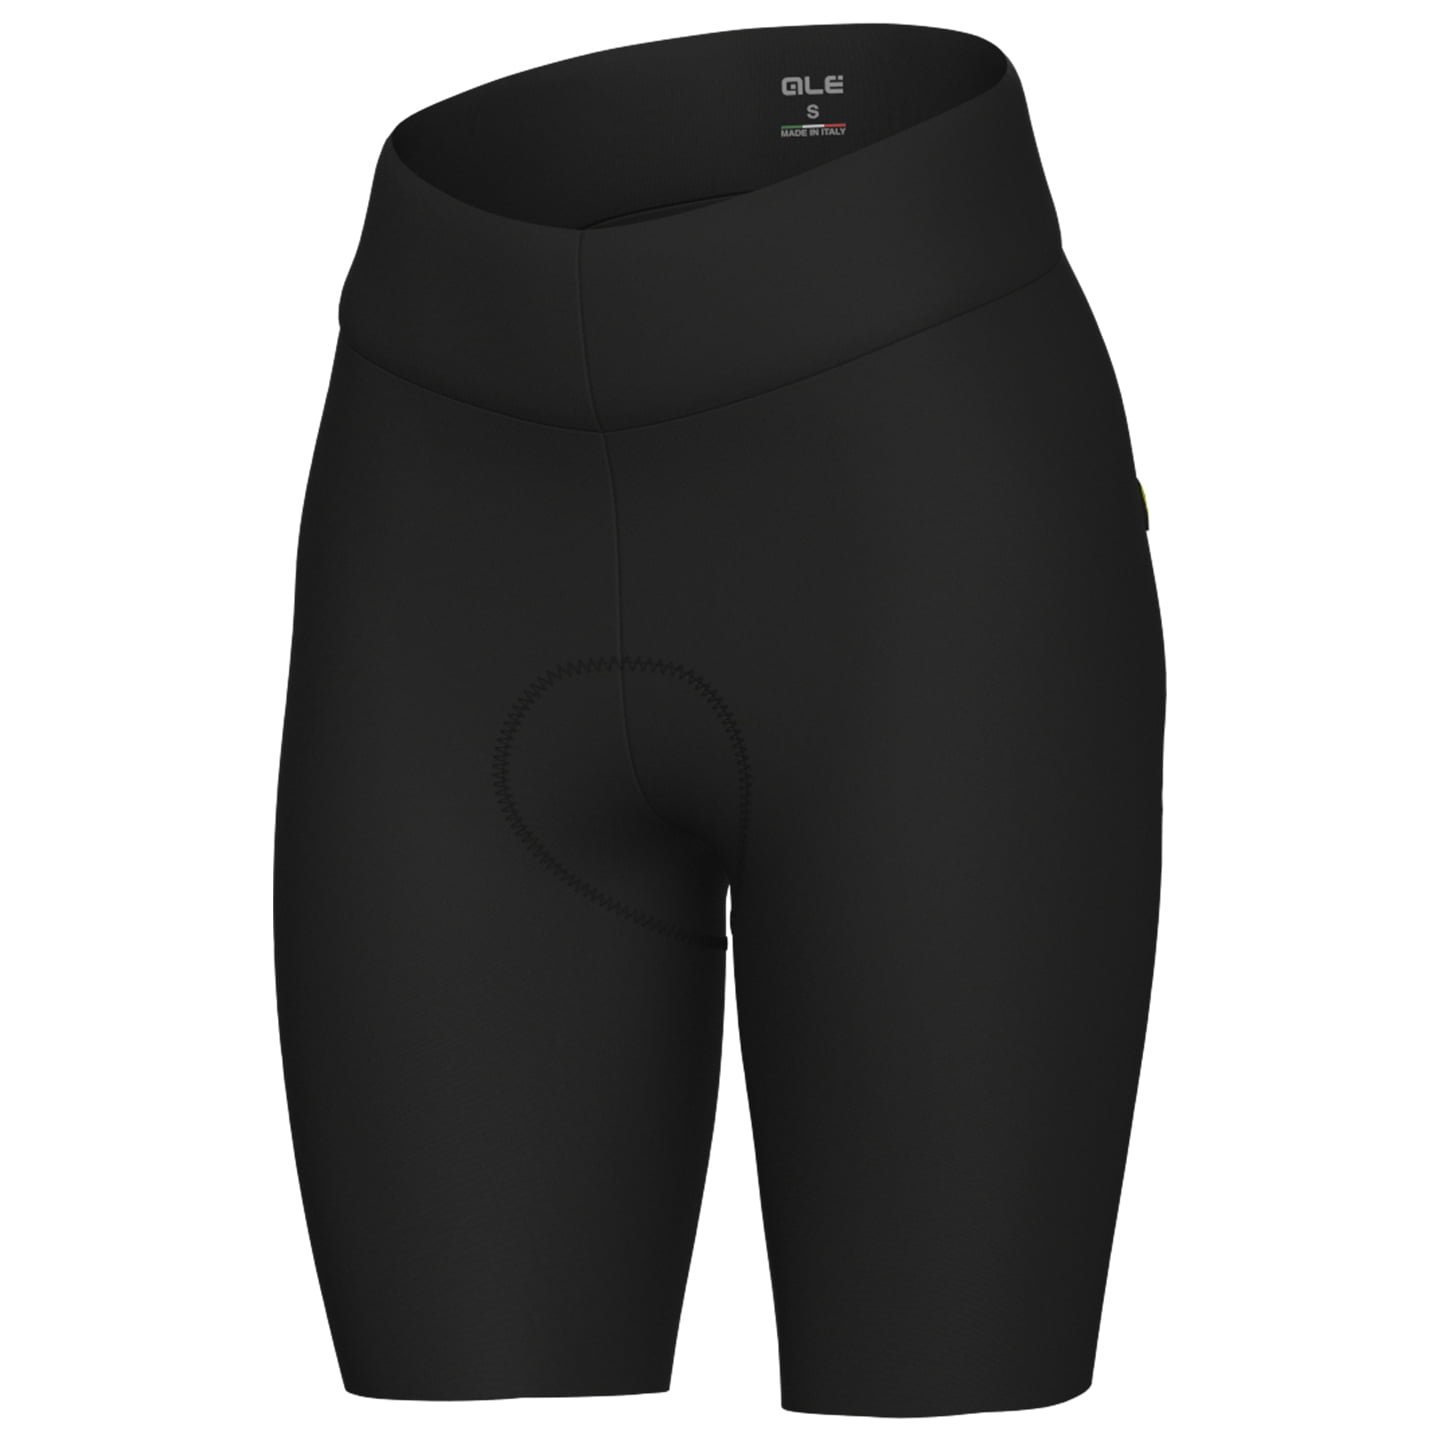 Master 2.0 Women’s Cycling Shorts Women’s Cycling Shorts, size S, Cycle trousers, Cycle clothing